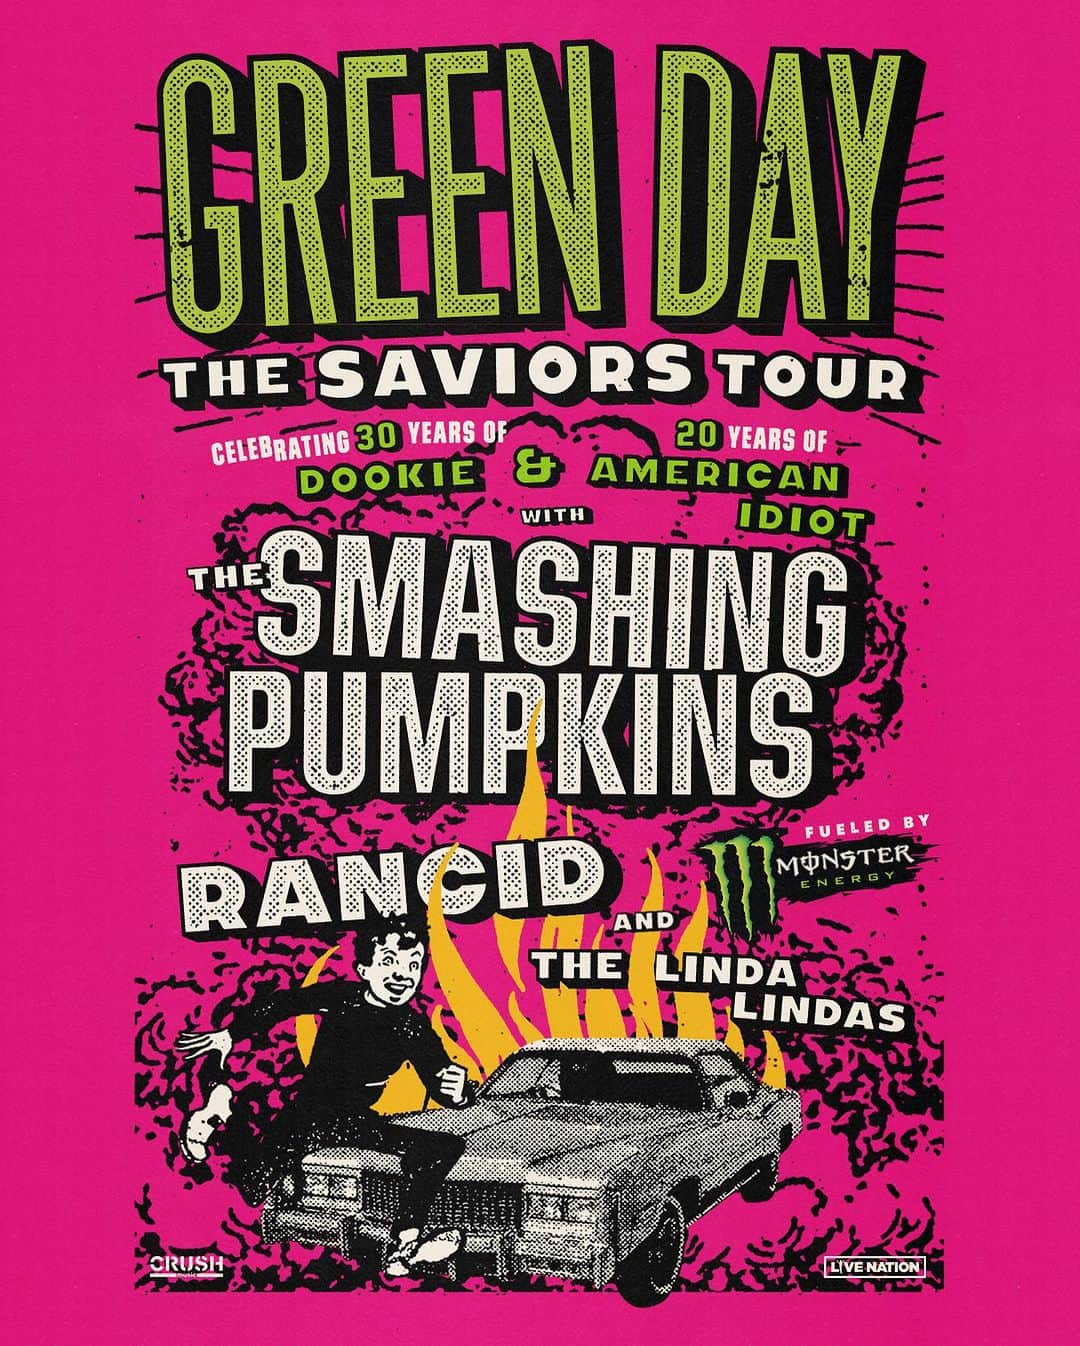 Green Dayのインスタグラム：「It’s the moment you’ve been waiting for… taking The Saviors Tour on the road all summer long next year to celebrate 30 years of 'Dookie,' 20 years of 'American Idiot' + our new album 'Saviors'!!! Swipe for dates   NORTH AMERICA  We're heading out at the end of July with @smashingpumpkins, @rancid and @the_linda_lindas 🤯🤯🤯 fueled by @monsterenergy @monstermusic. Sign up to the mailing list by Tuesday, November 7th to get access to pre-sale tickets. The code will be sent at 3pm PT on the 7th. Pre-sale starts Wednesday, November 8th @ 10am local. General on sale is Friday, November 10th @ 10am local.   UNITED KINGDOM & EUROPE  We'll see you starting in June with support on select dates from @nothingbutthieves, @thehives, @donotsofficial, @theinterrupters and @maid_of_ace. Pre-order 'Saviors’ from our webstore by Tuesday, 7th November @ 3pm GMT to get access to pre-sale tickets. The codes will be sent Tuesday 7th, November @ 5pm GMT. Already pre-ordered from the store? You’ll be included! The pre-sale starts Wednesday, 8th November at  9:30am GMT / 10:30am CET. General on sale is Friday, 10th November @ 9:30am GMT / 10:30am CET.   Oh! We’re also headlining a buuuunch of festivals in Europe this summer too🤘  LOOK MA, NO BRAINS!  Last, but certainly not least, we have a new song out!!! Go go go listen to "Look Ma, No Brains!" + watch the vid on YouTube 🚫🧠 Links to everything in bio!」